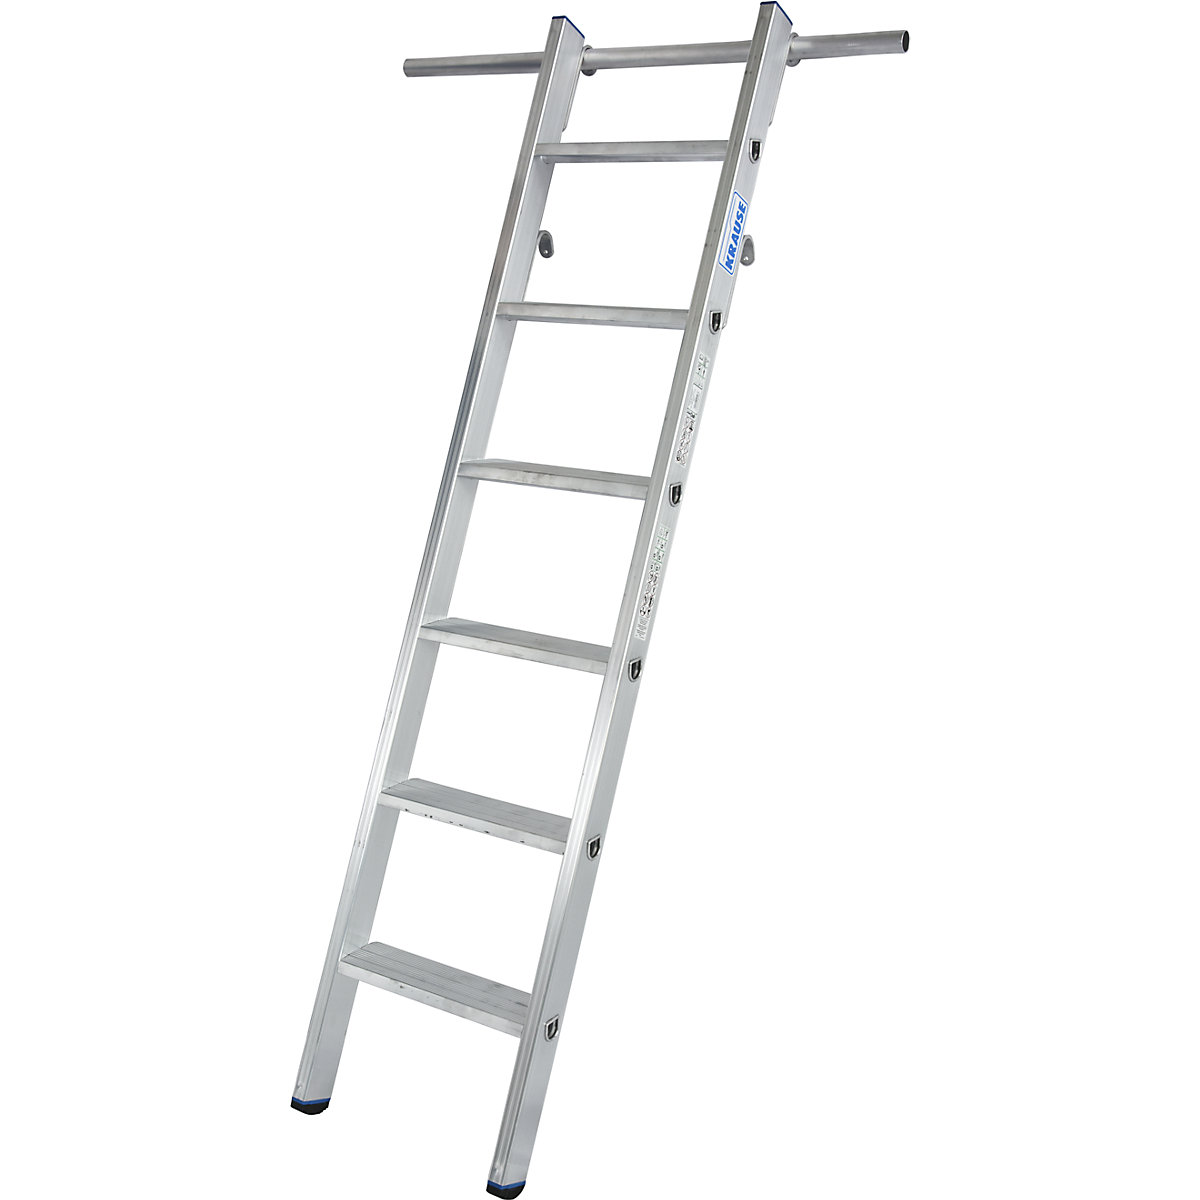 KRAUSE – Step shelf ladder, can be suspended, 2 pairs of suspension hooks, 6 steps